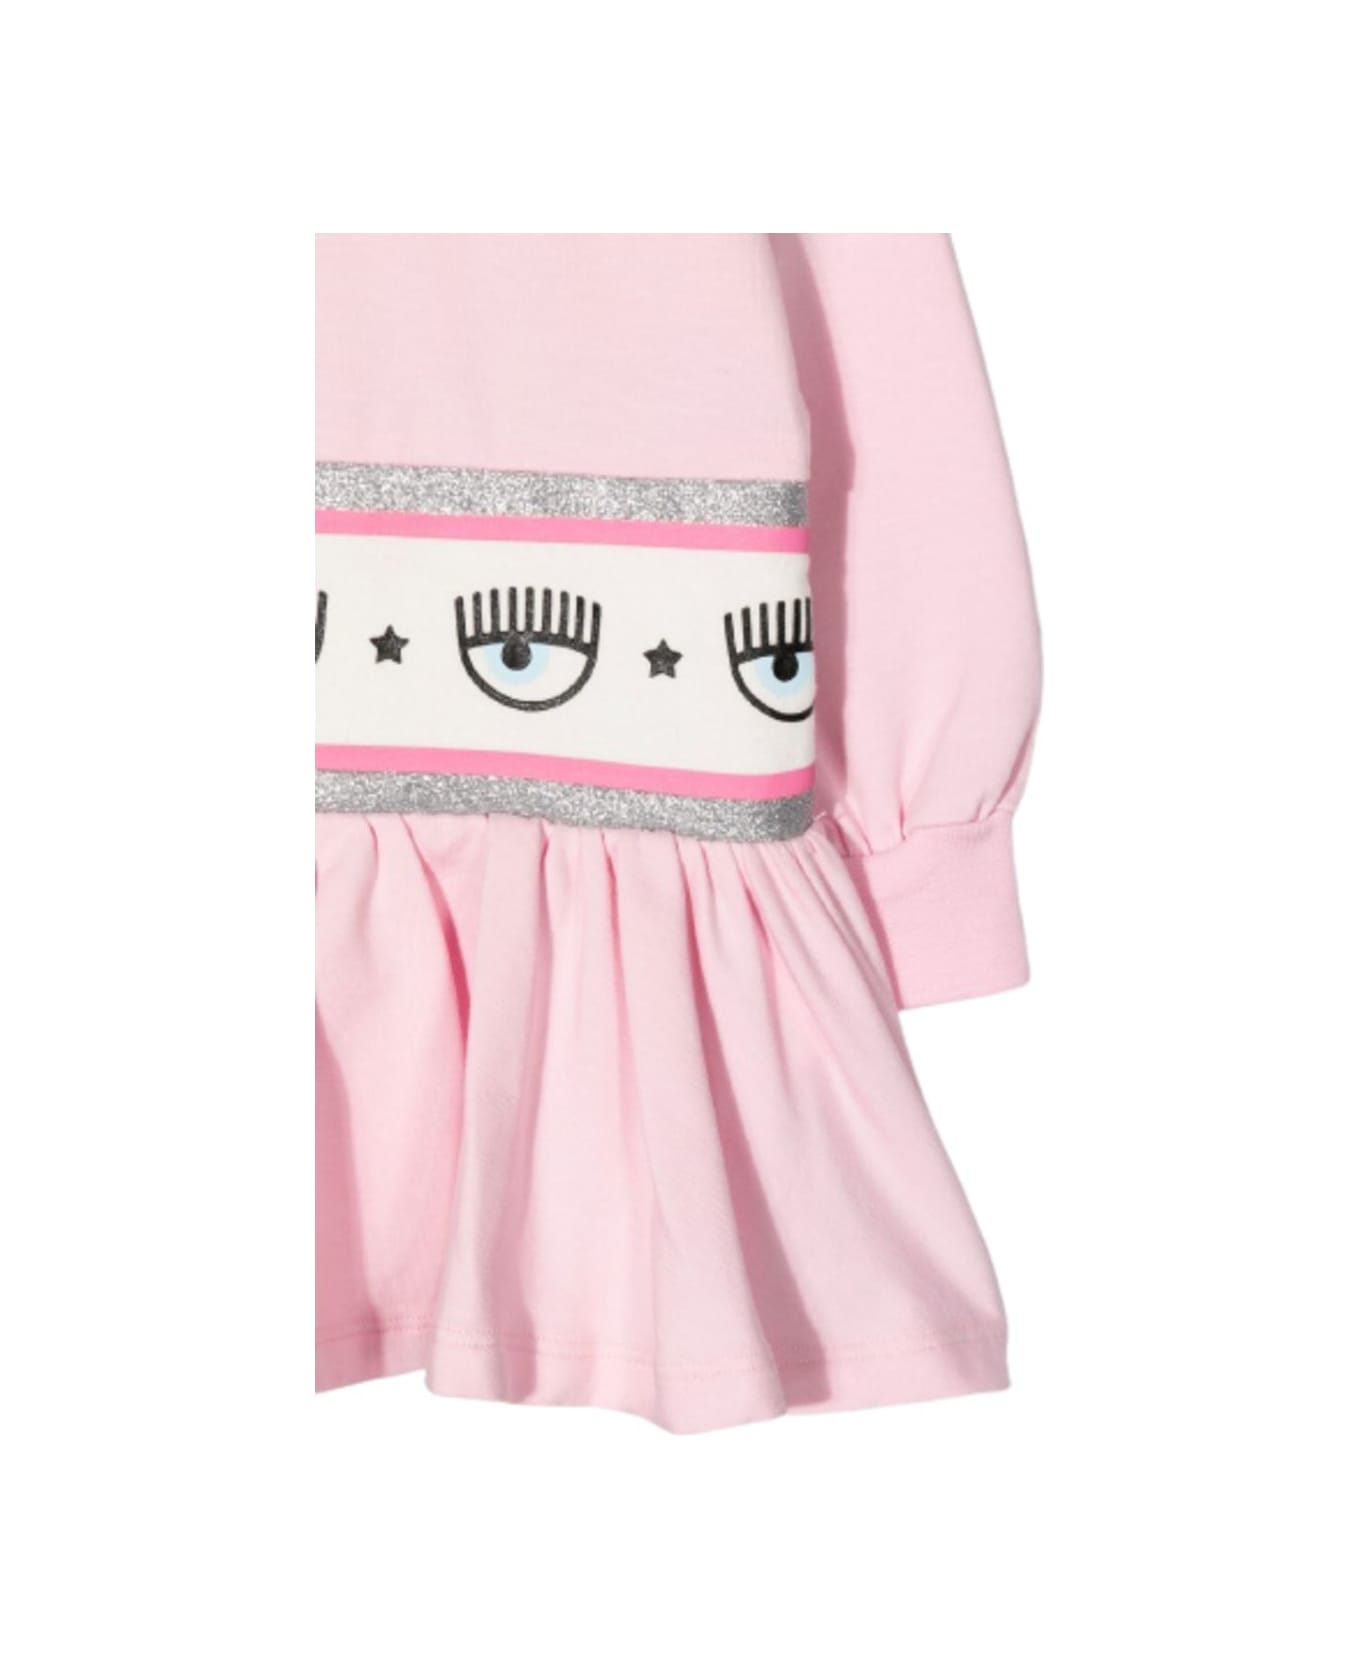 Chiara Ferragni Light Pink Sweater Dress In Cotton With Embossed Logo On The Waist - PINK